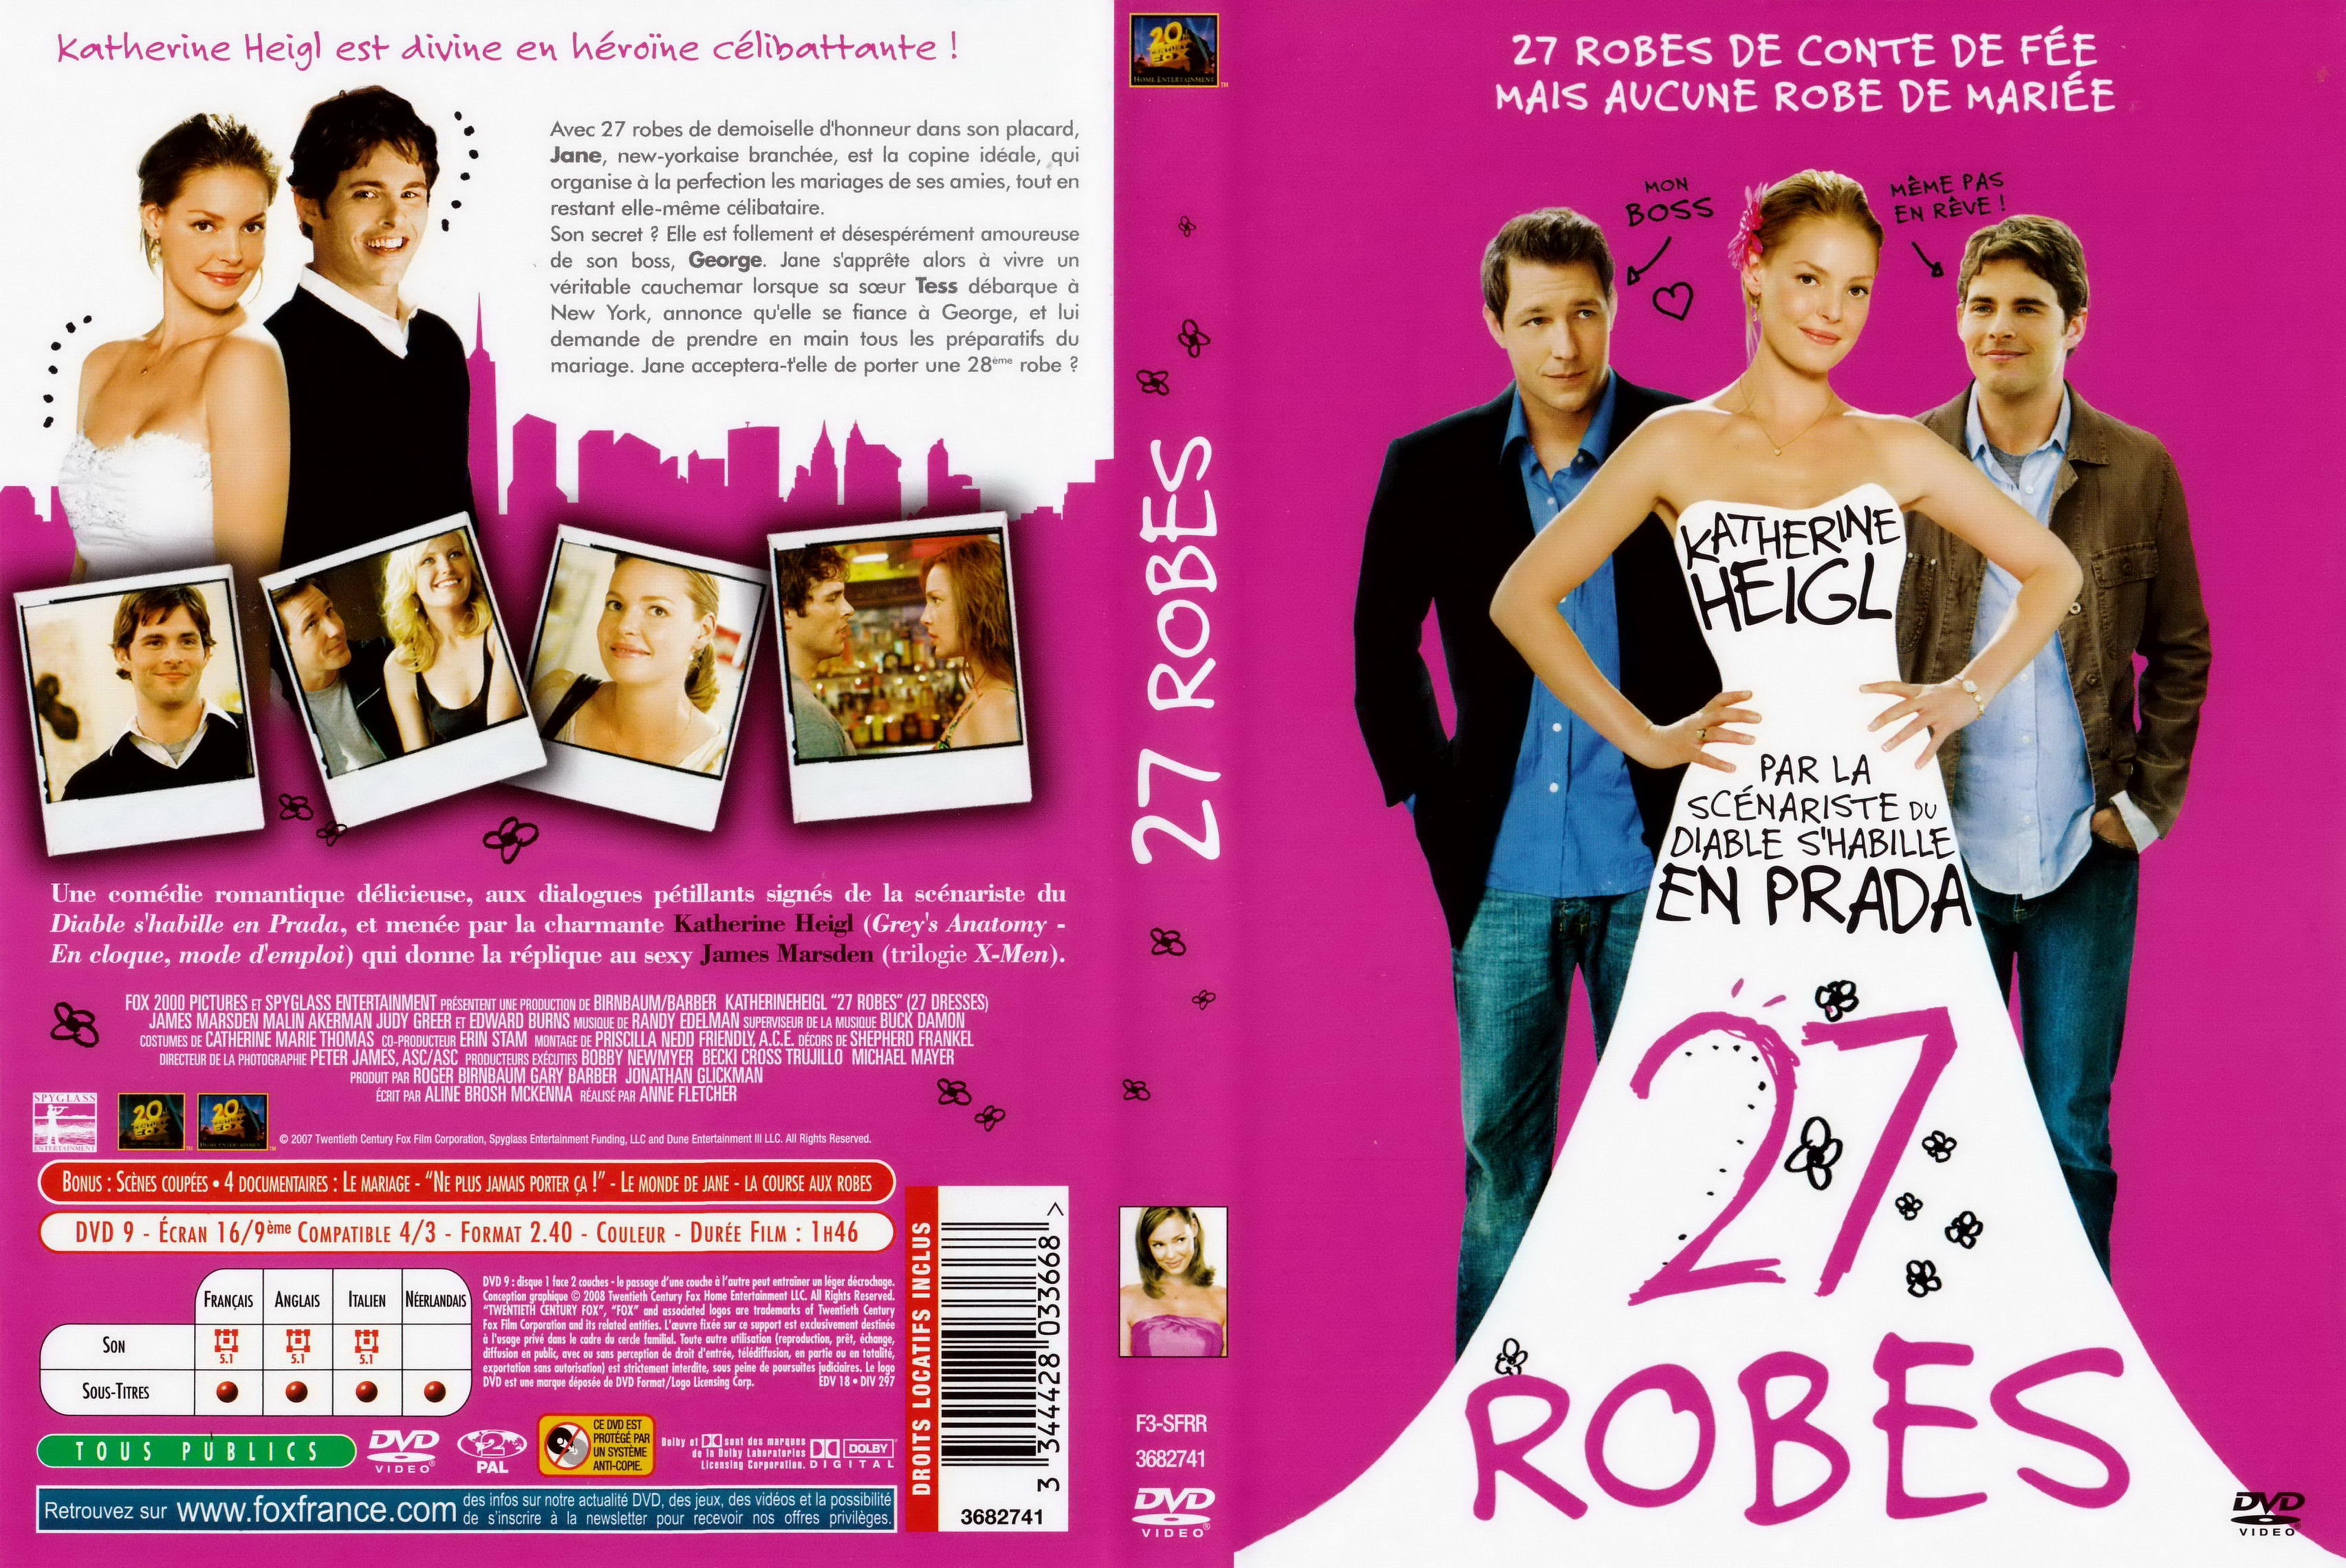 Jaquette DVD 27 robes